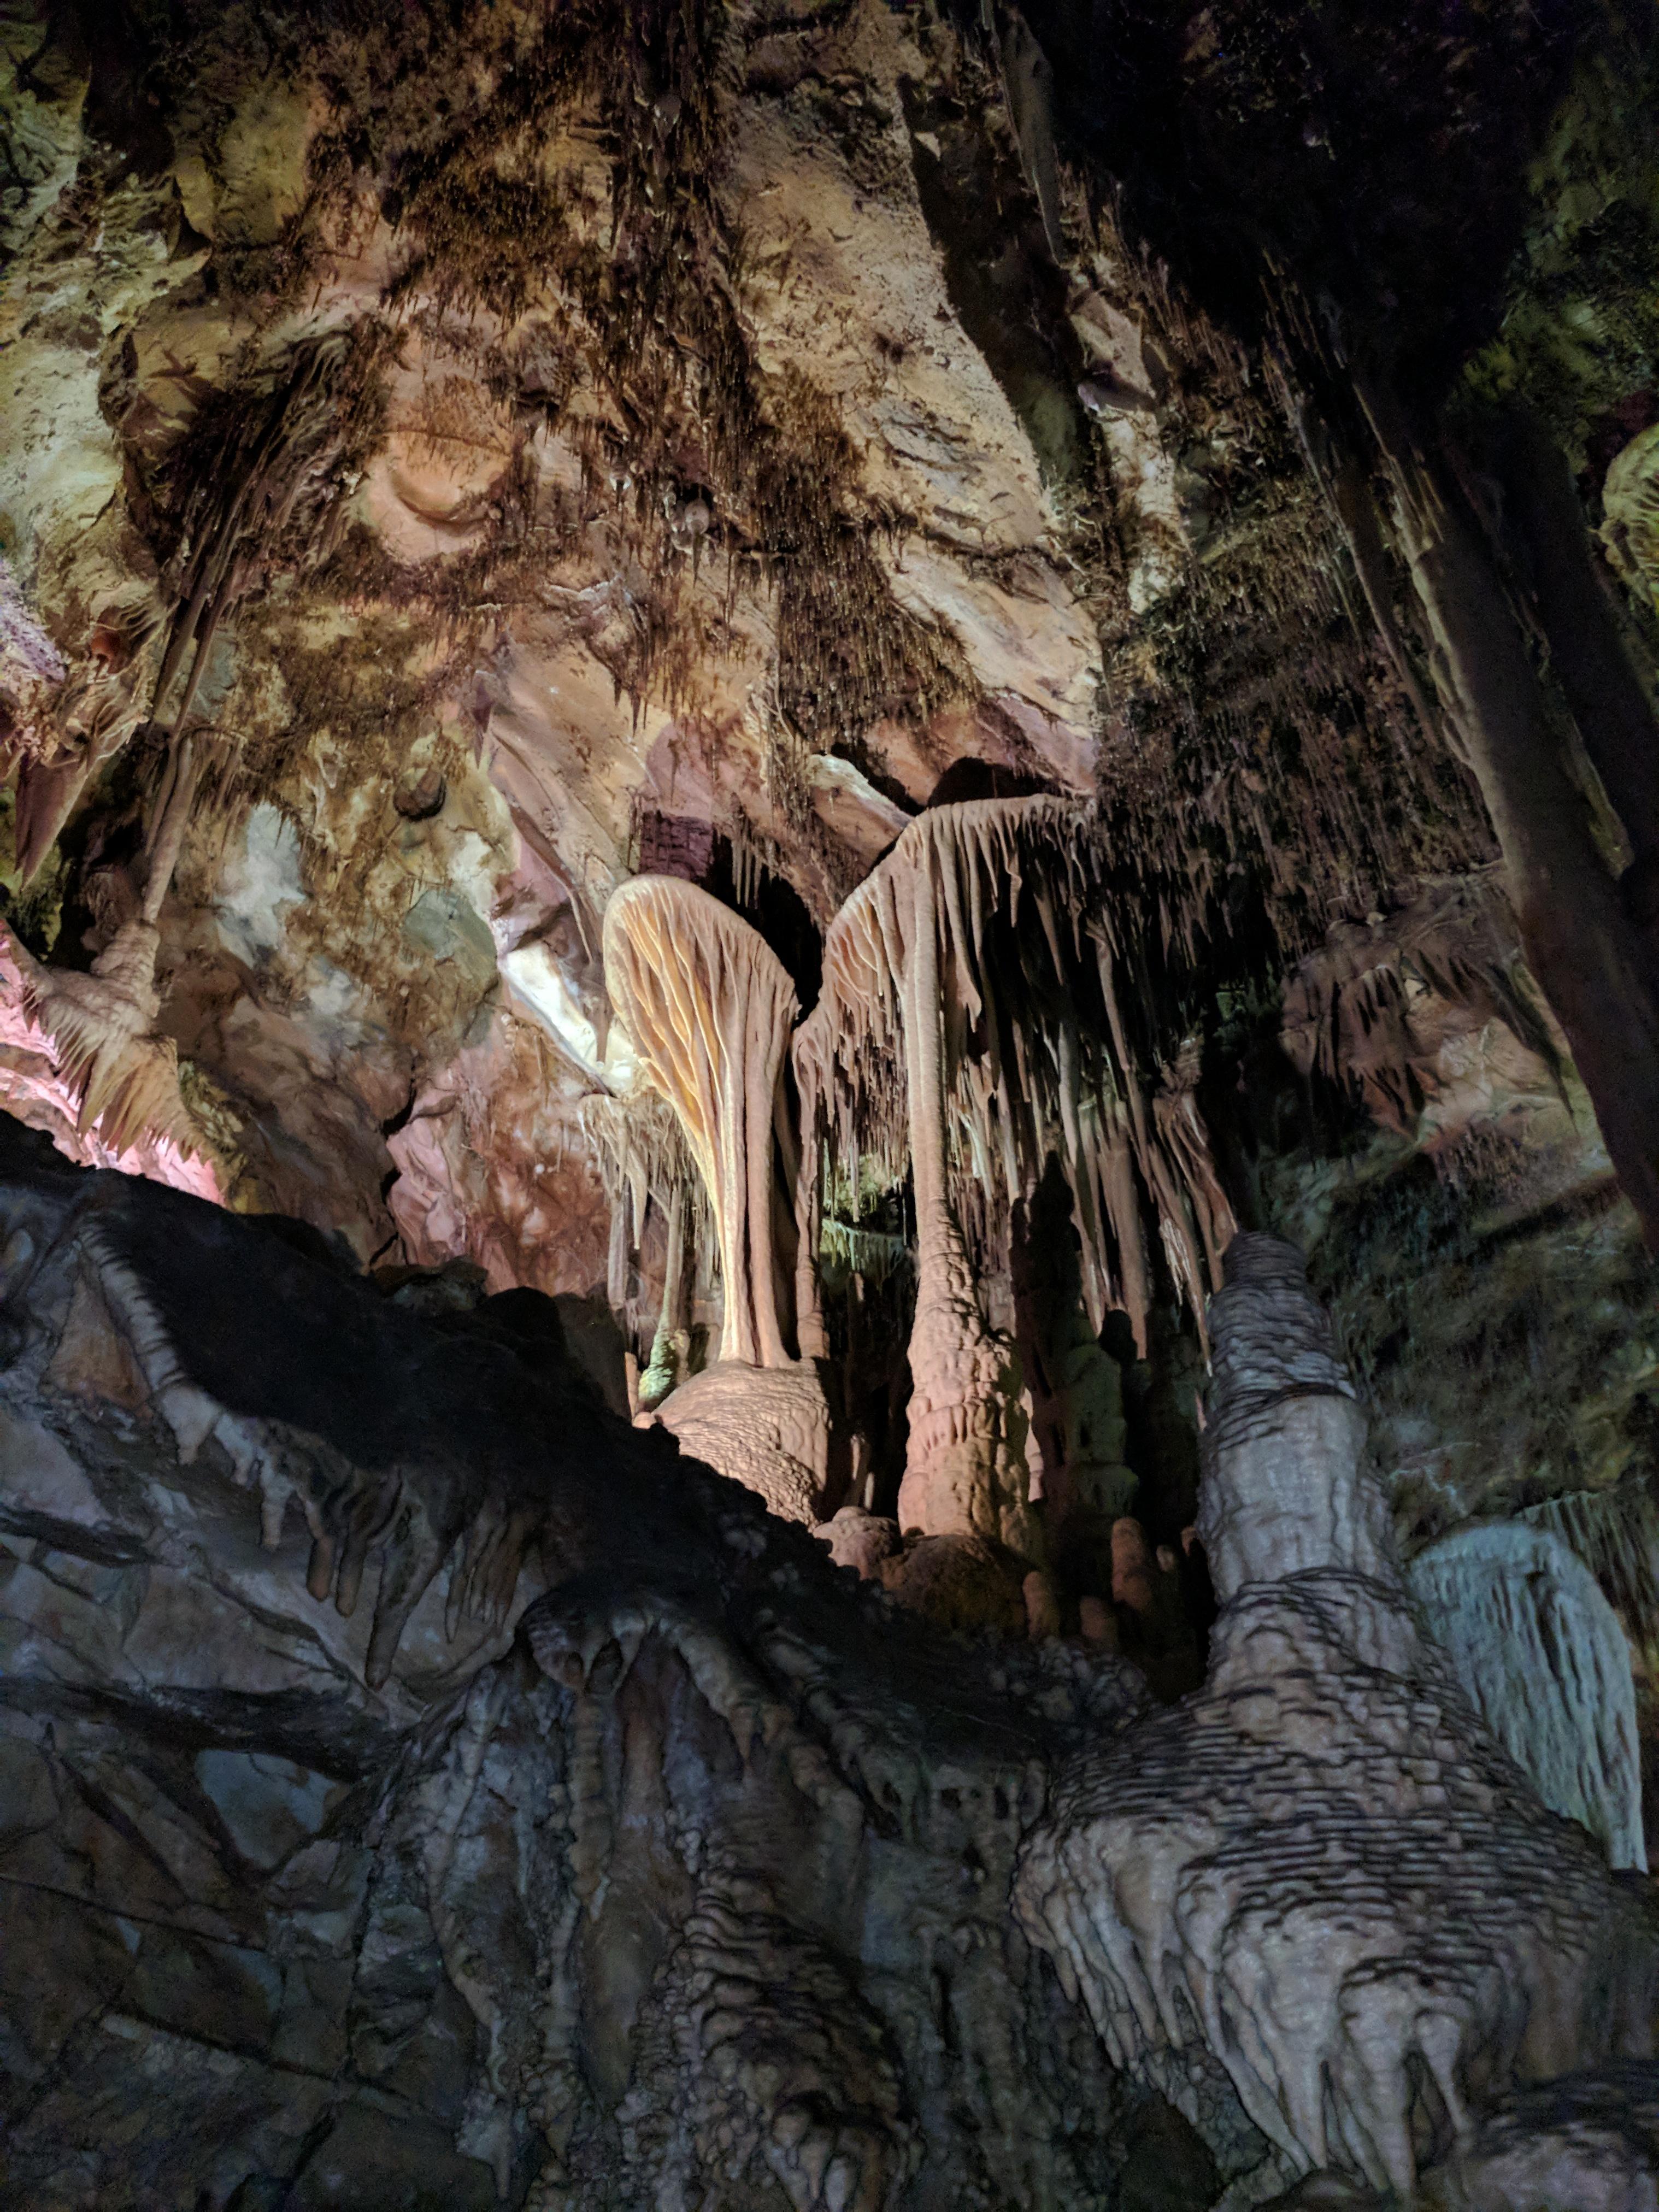 Brown and tan cave formation in the shape of a parachute